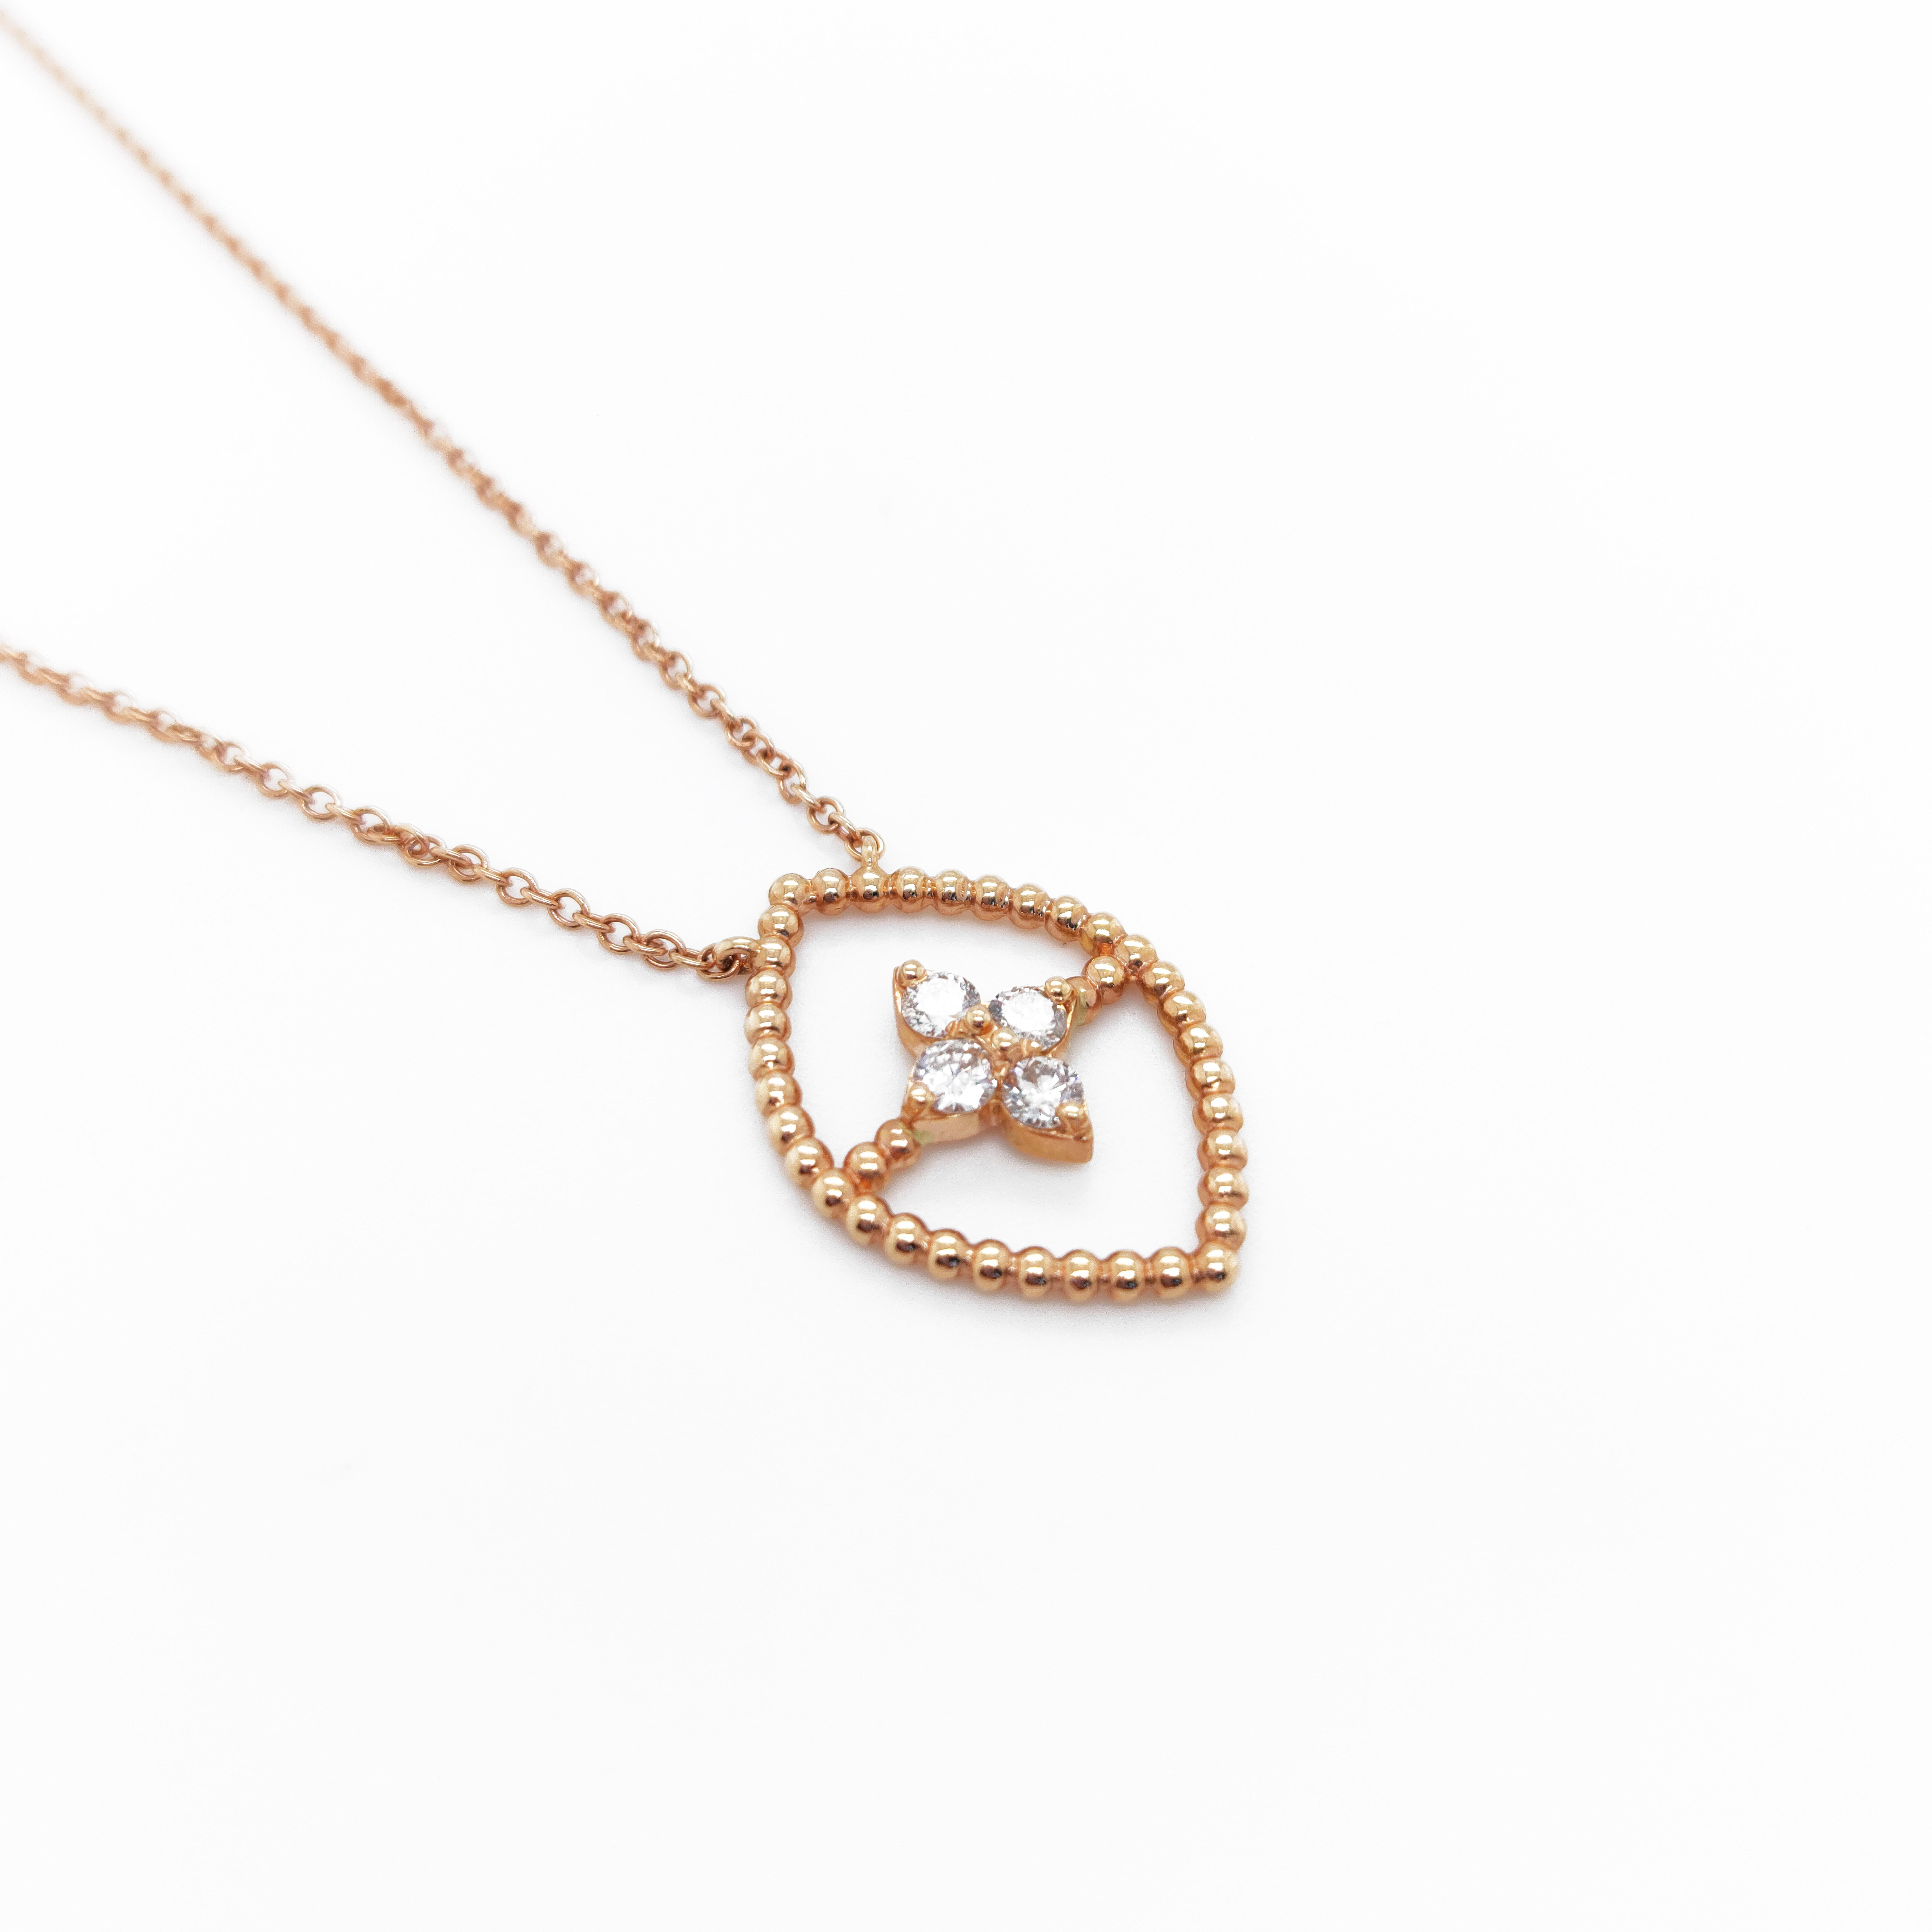 This 18KT Rose gold & diamonds Navette necklace is easily worn everyday as it is light and sparkly! 
The Navette gold design includes a diamond motif of 0,25cts G-VS natural white diamonds.
This addition of diamonds to the necklace further enhances